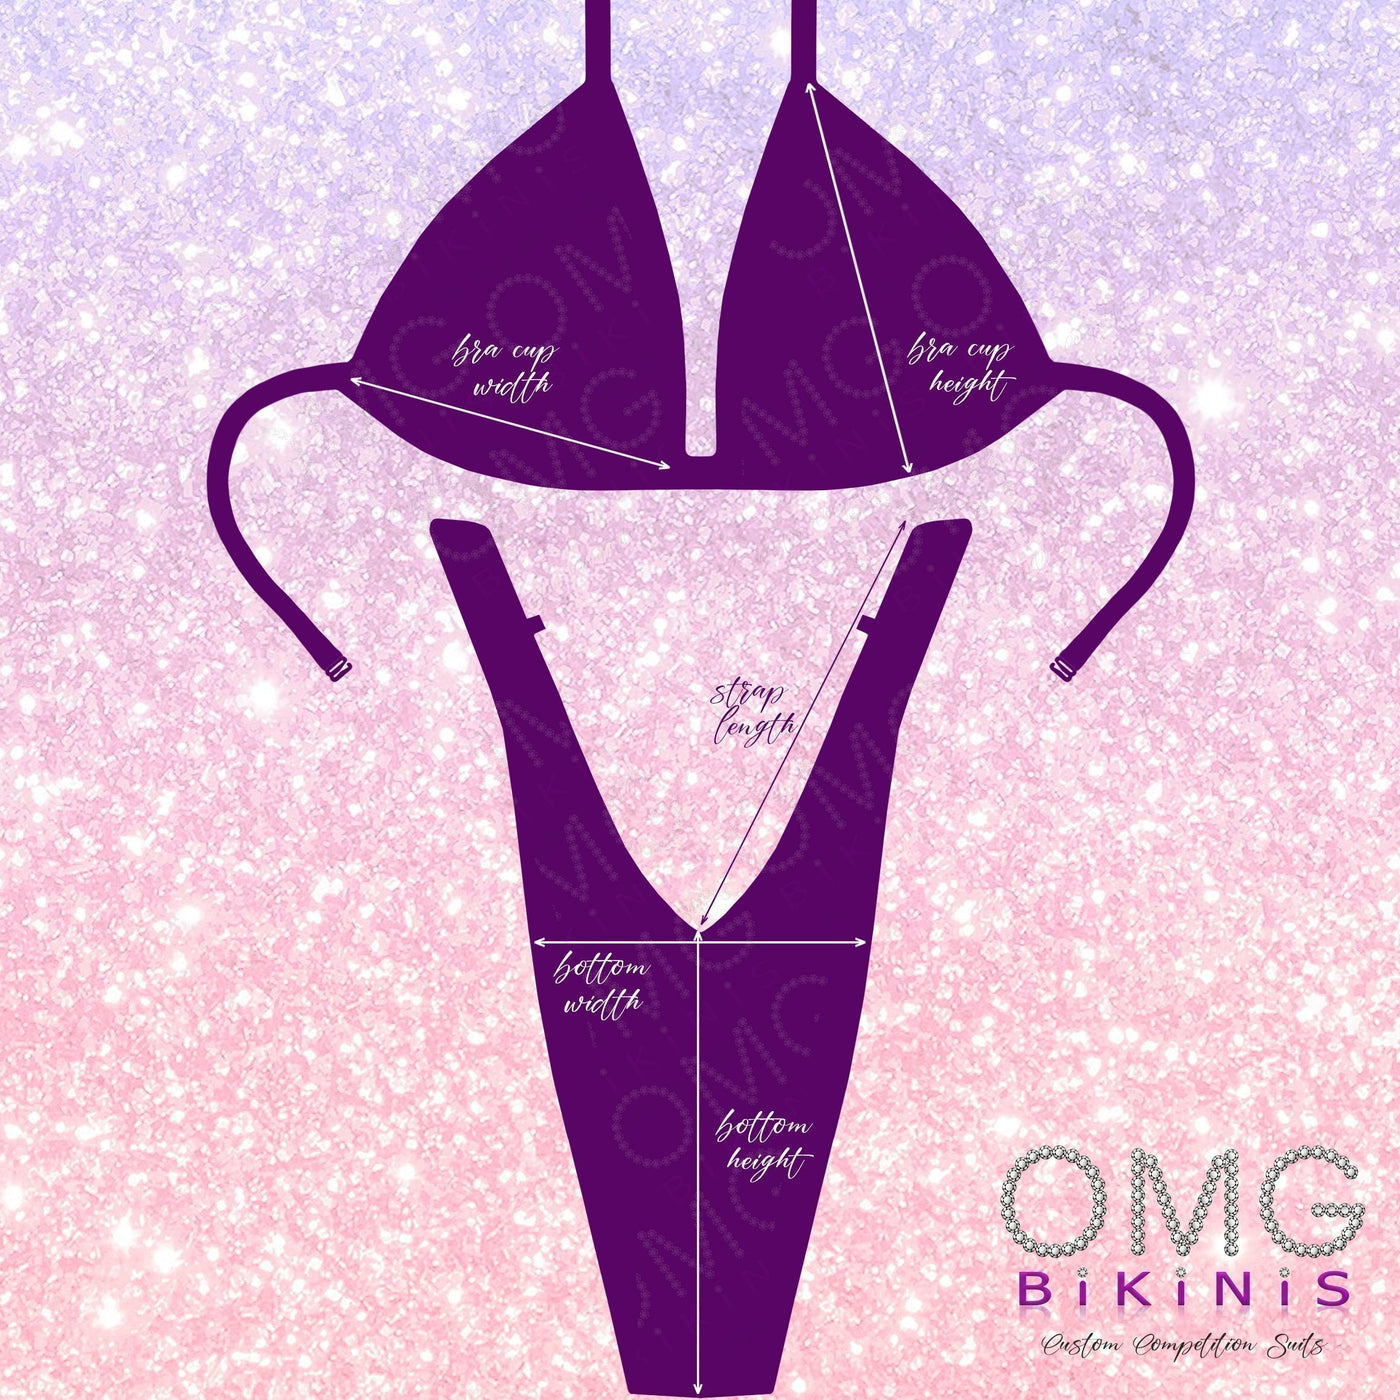 Marina Figure/WPD Competition Suit S/S | OMG Bikinis Rentals